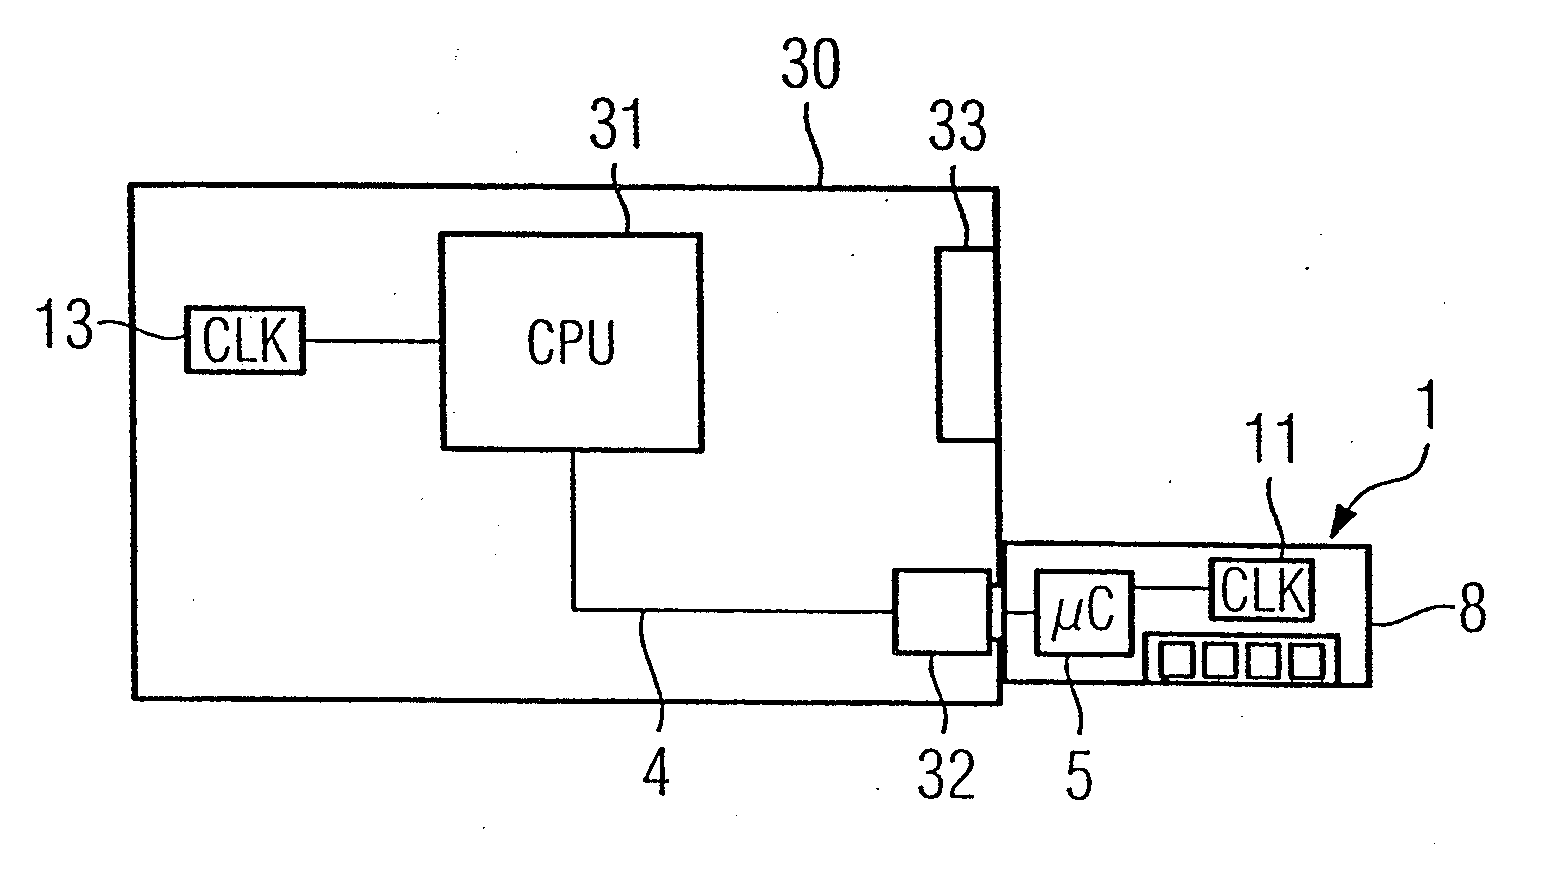 Apparatus for Plugging into a Computation System, and Computation System